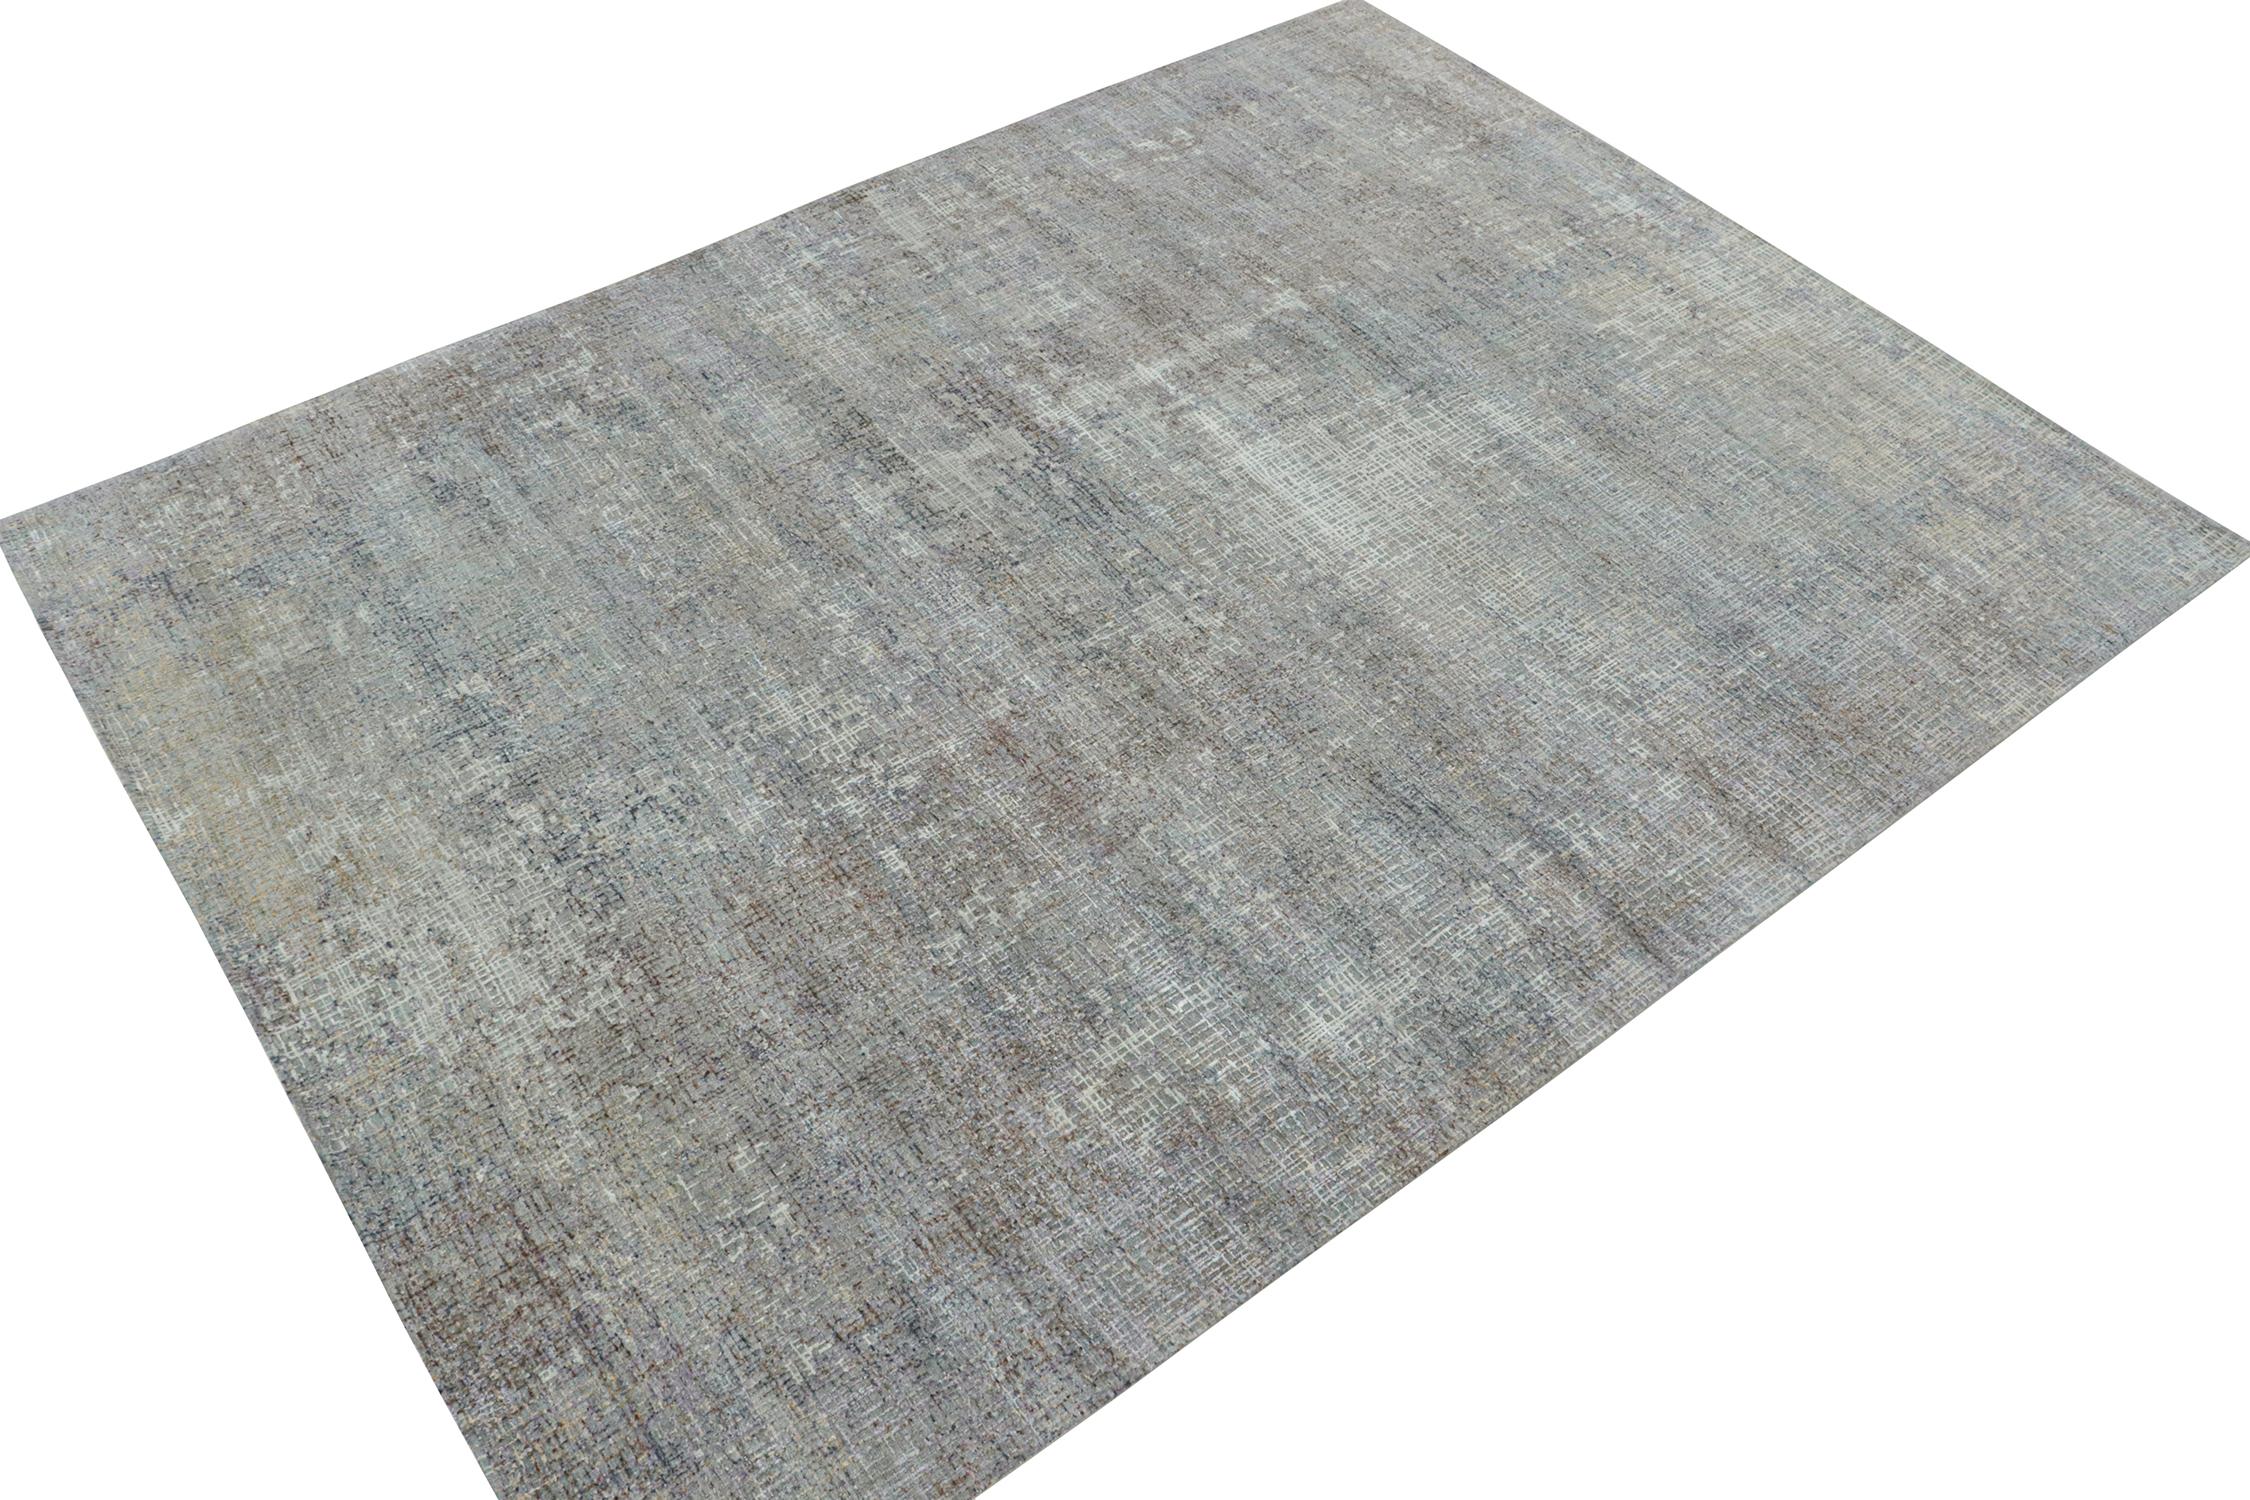 This 9x12 abstract rug is a new addition to Rug & Kilim’s bold modern rug designs. Hand-knotted in wool and silk.
Further on the Design: 
This pattern enjoys geometric streaks in gray and colorful undertones, seldom seen in such subdued and skillful